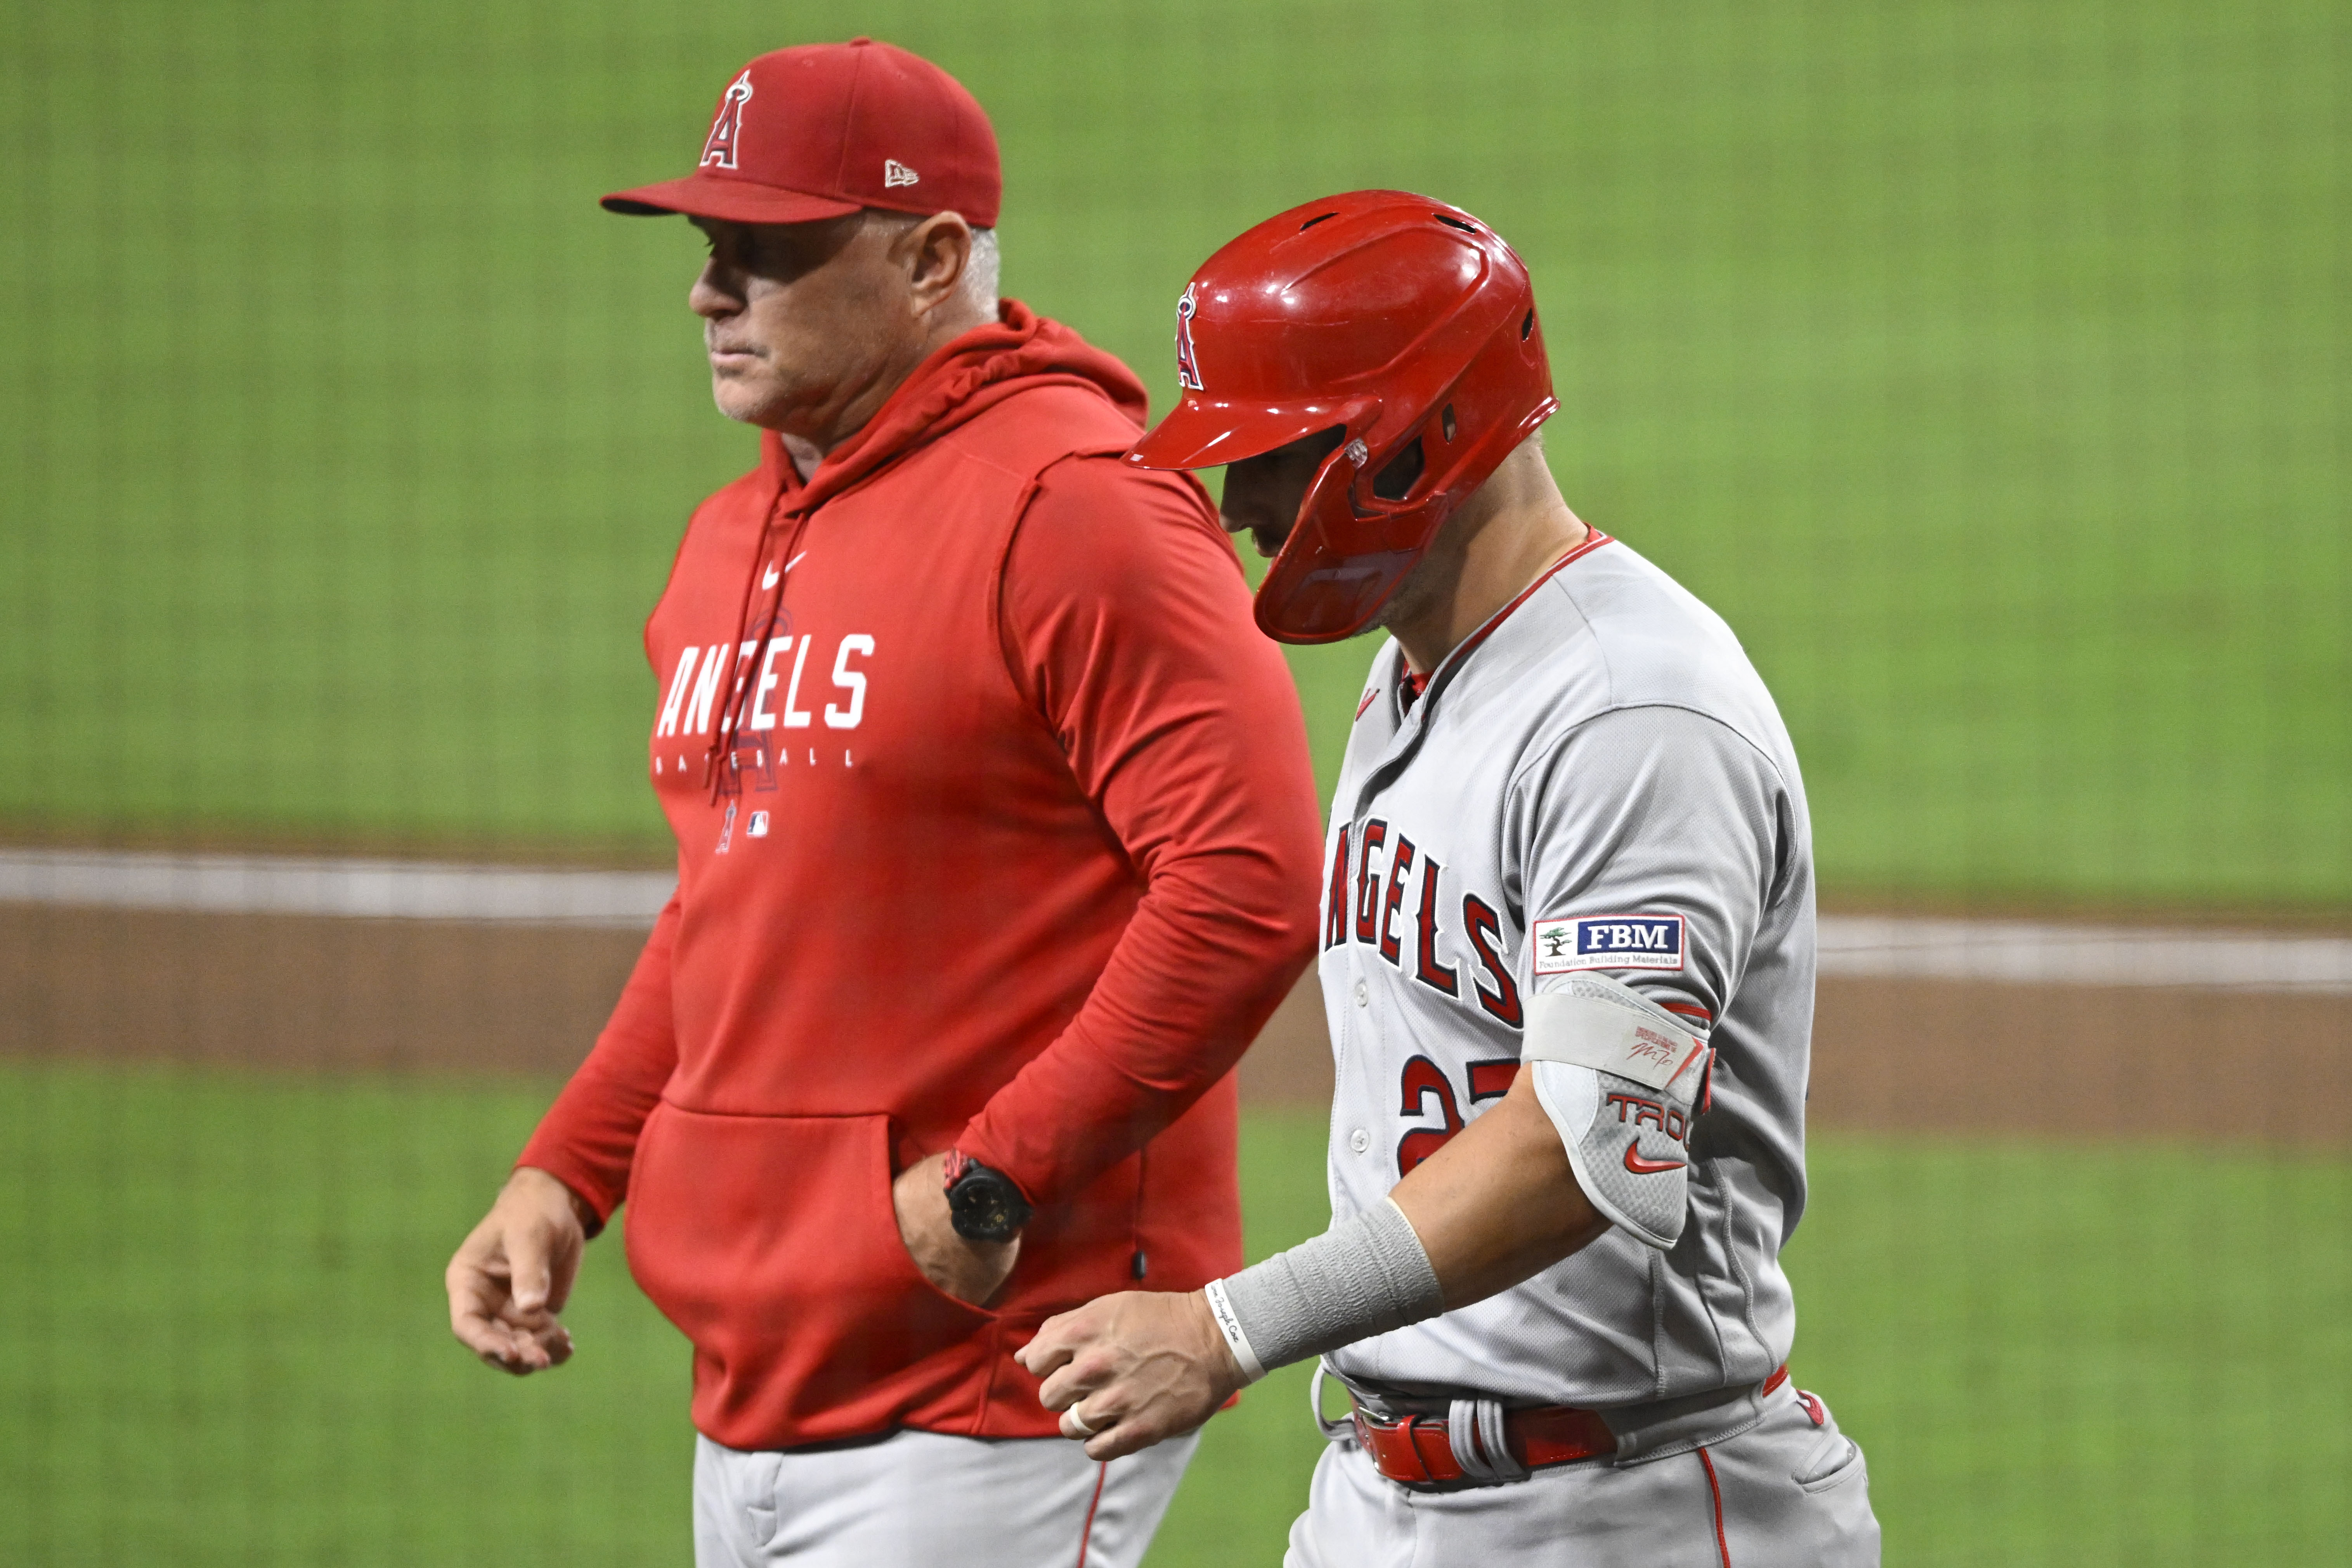 Angels star center fielder Mike Trout undergoes surgery on fractured wrist;  no timetable for return - The Boston Globe